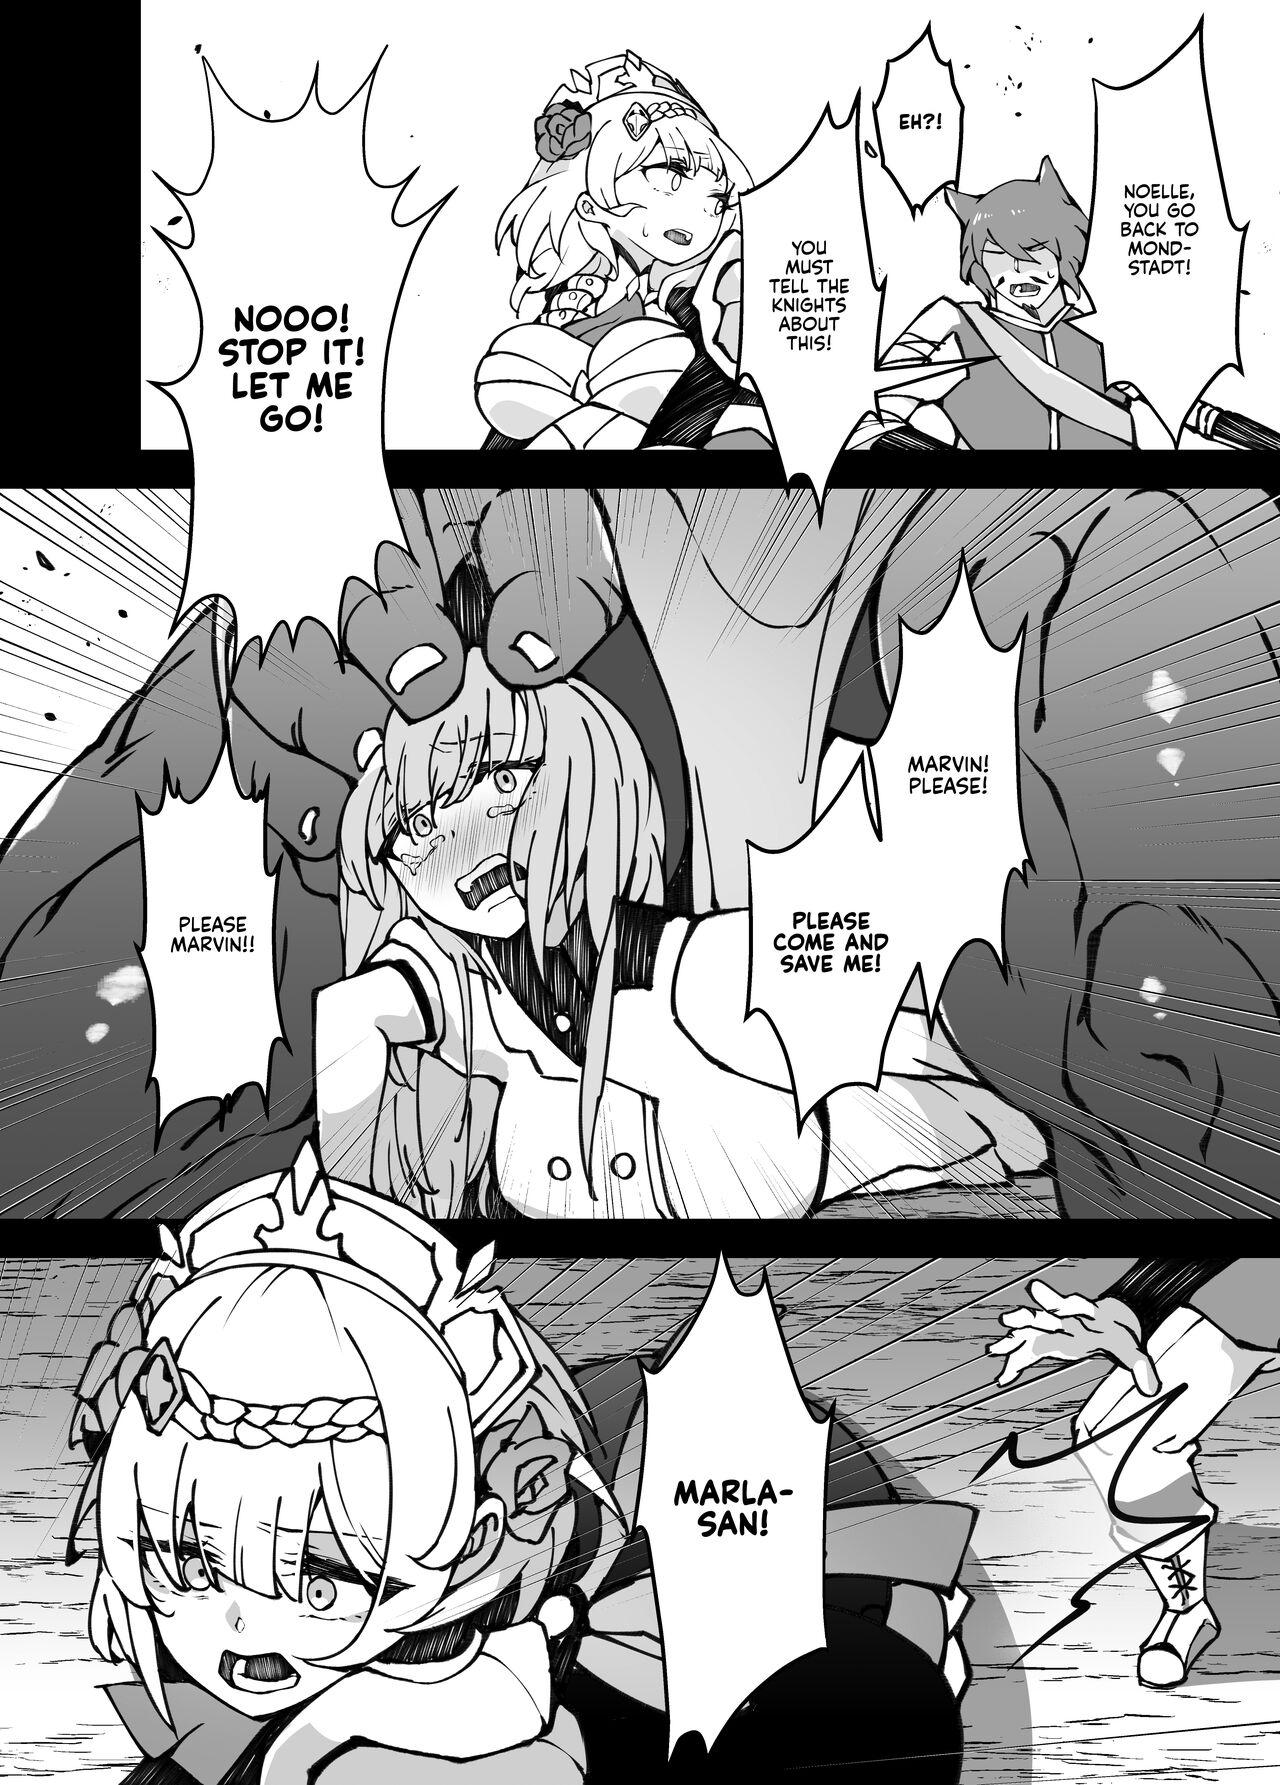 Menage [Karouke (Karou)] The Attack of the Hilichurls II ~The Invasion's Prelude~ Noelle,Chivalric Blossom that withered~ (Genshin Impact) [English] [Kyuume] [Digital] - Genshin impact Free Blow Job - Page 11